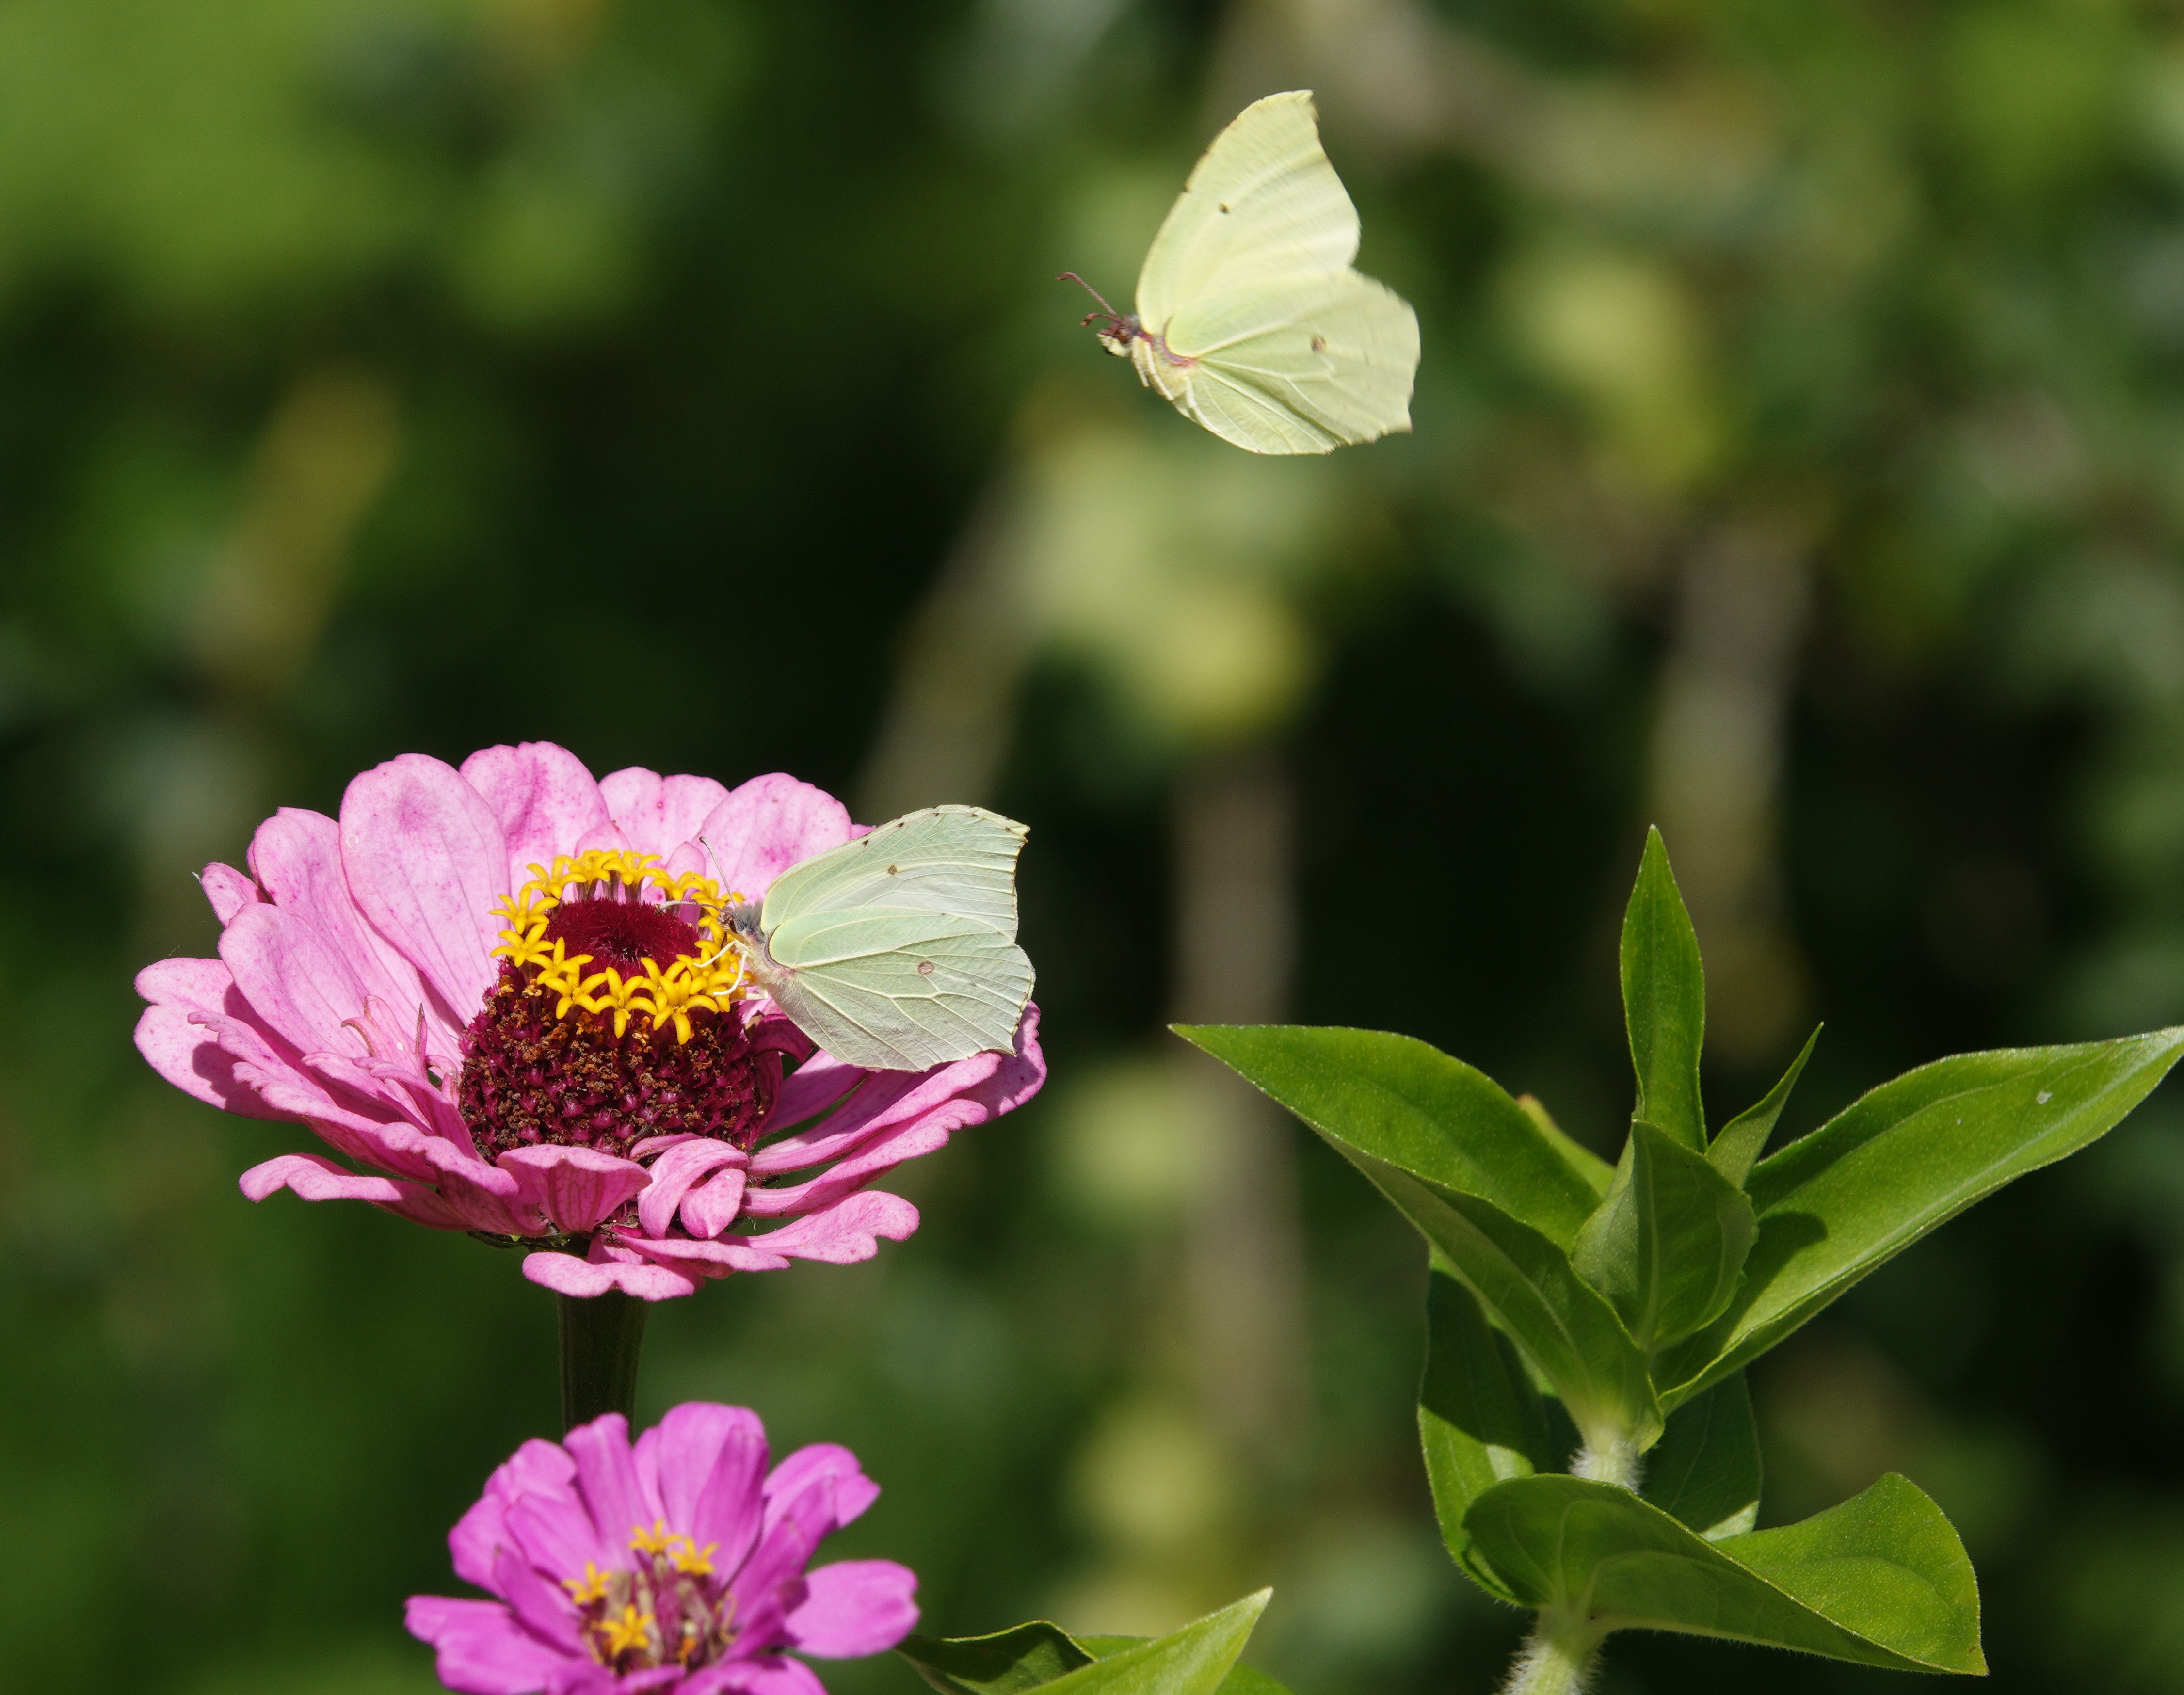 Male Brimstone dropping in to join his female friend on the Zinnia